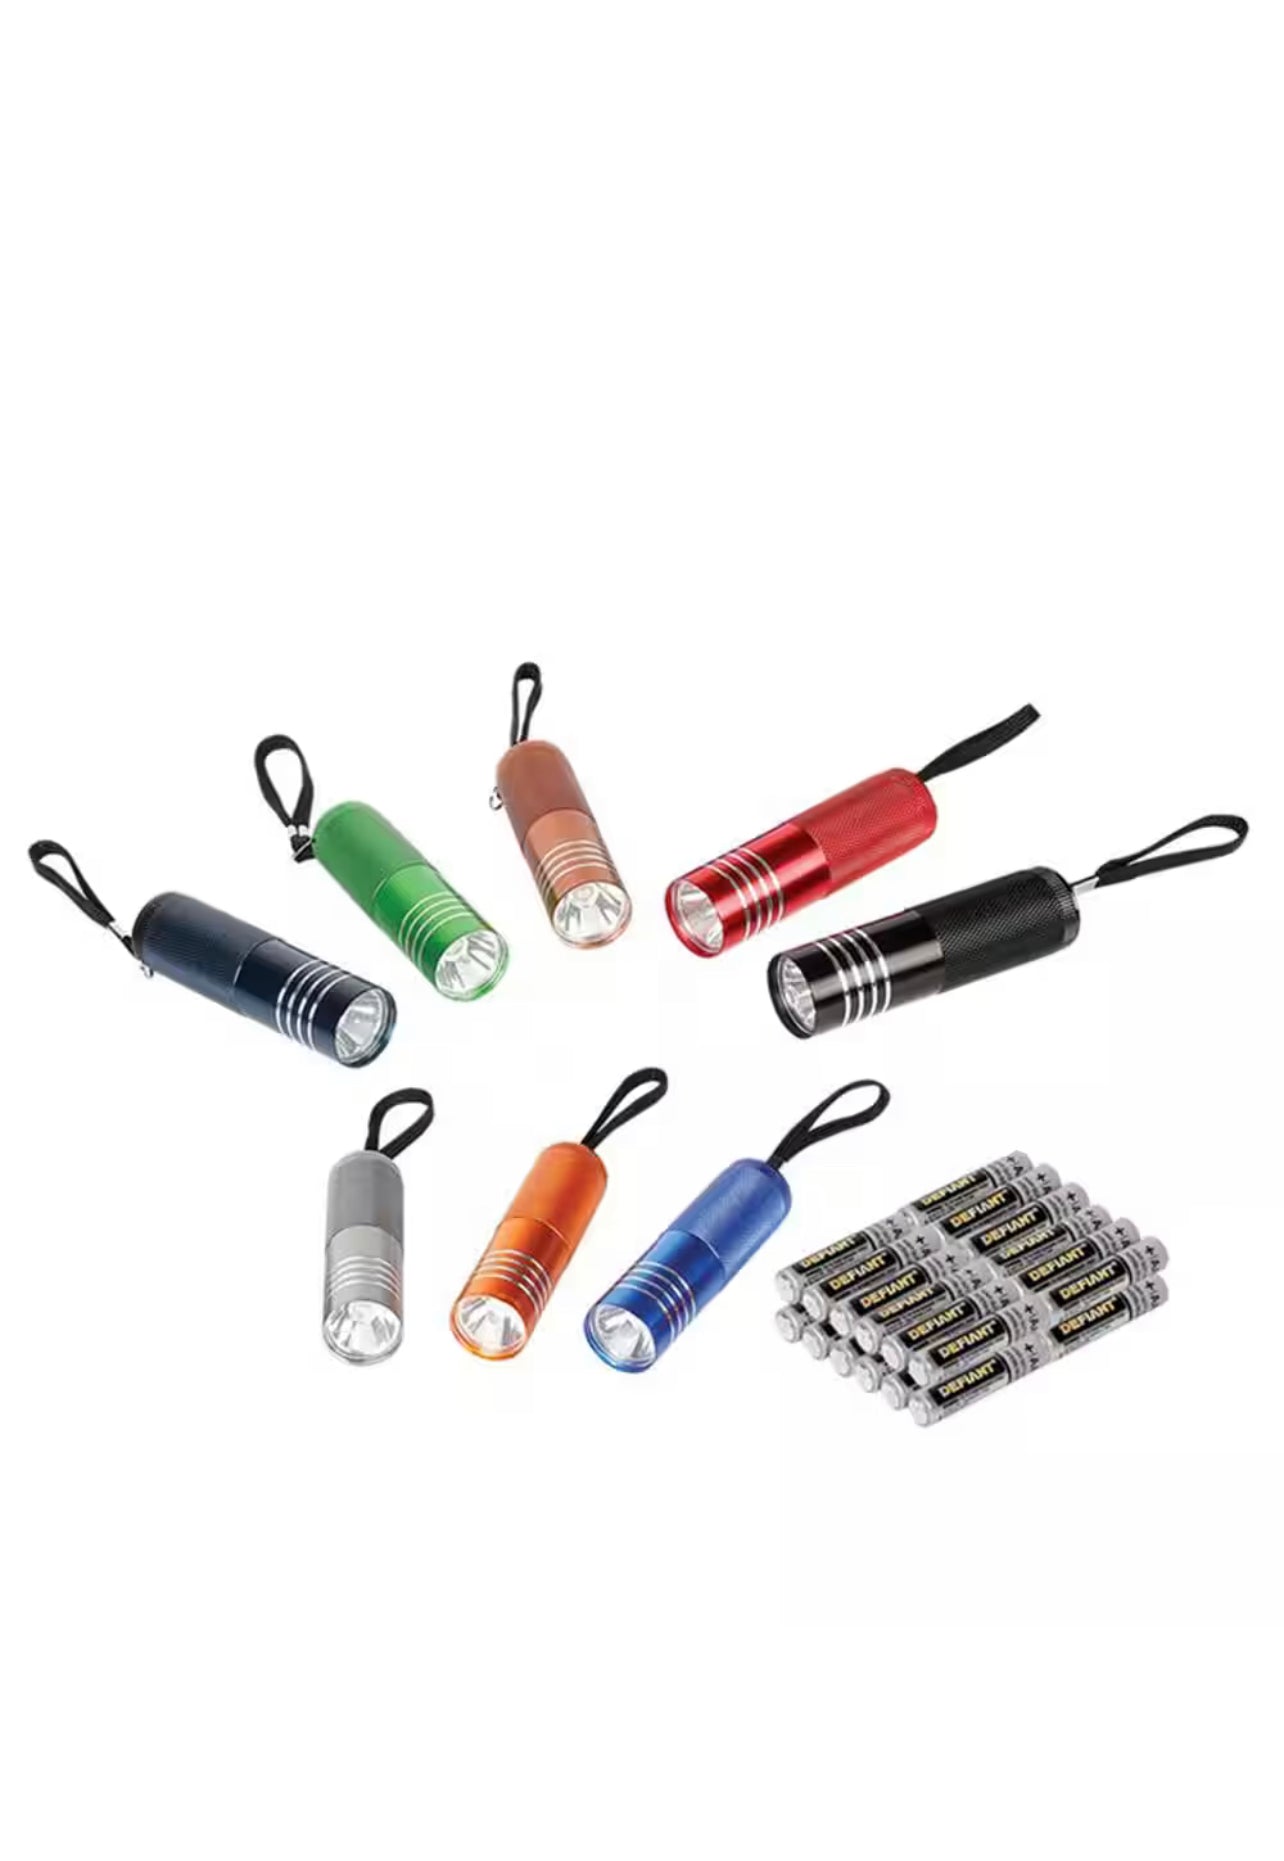 Defiant 8 Pack Of Aluminum Flashlight New In The Pack